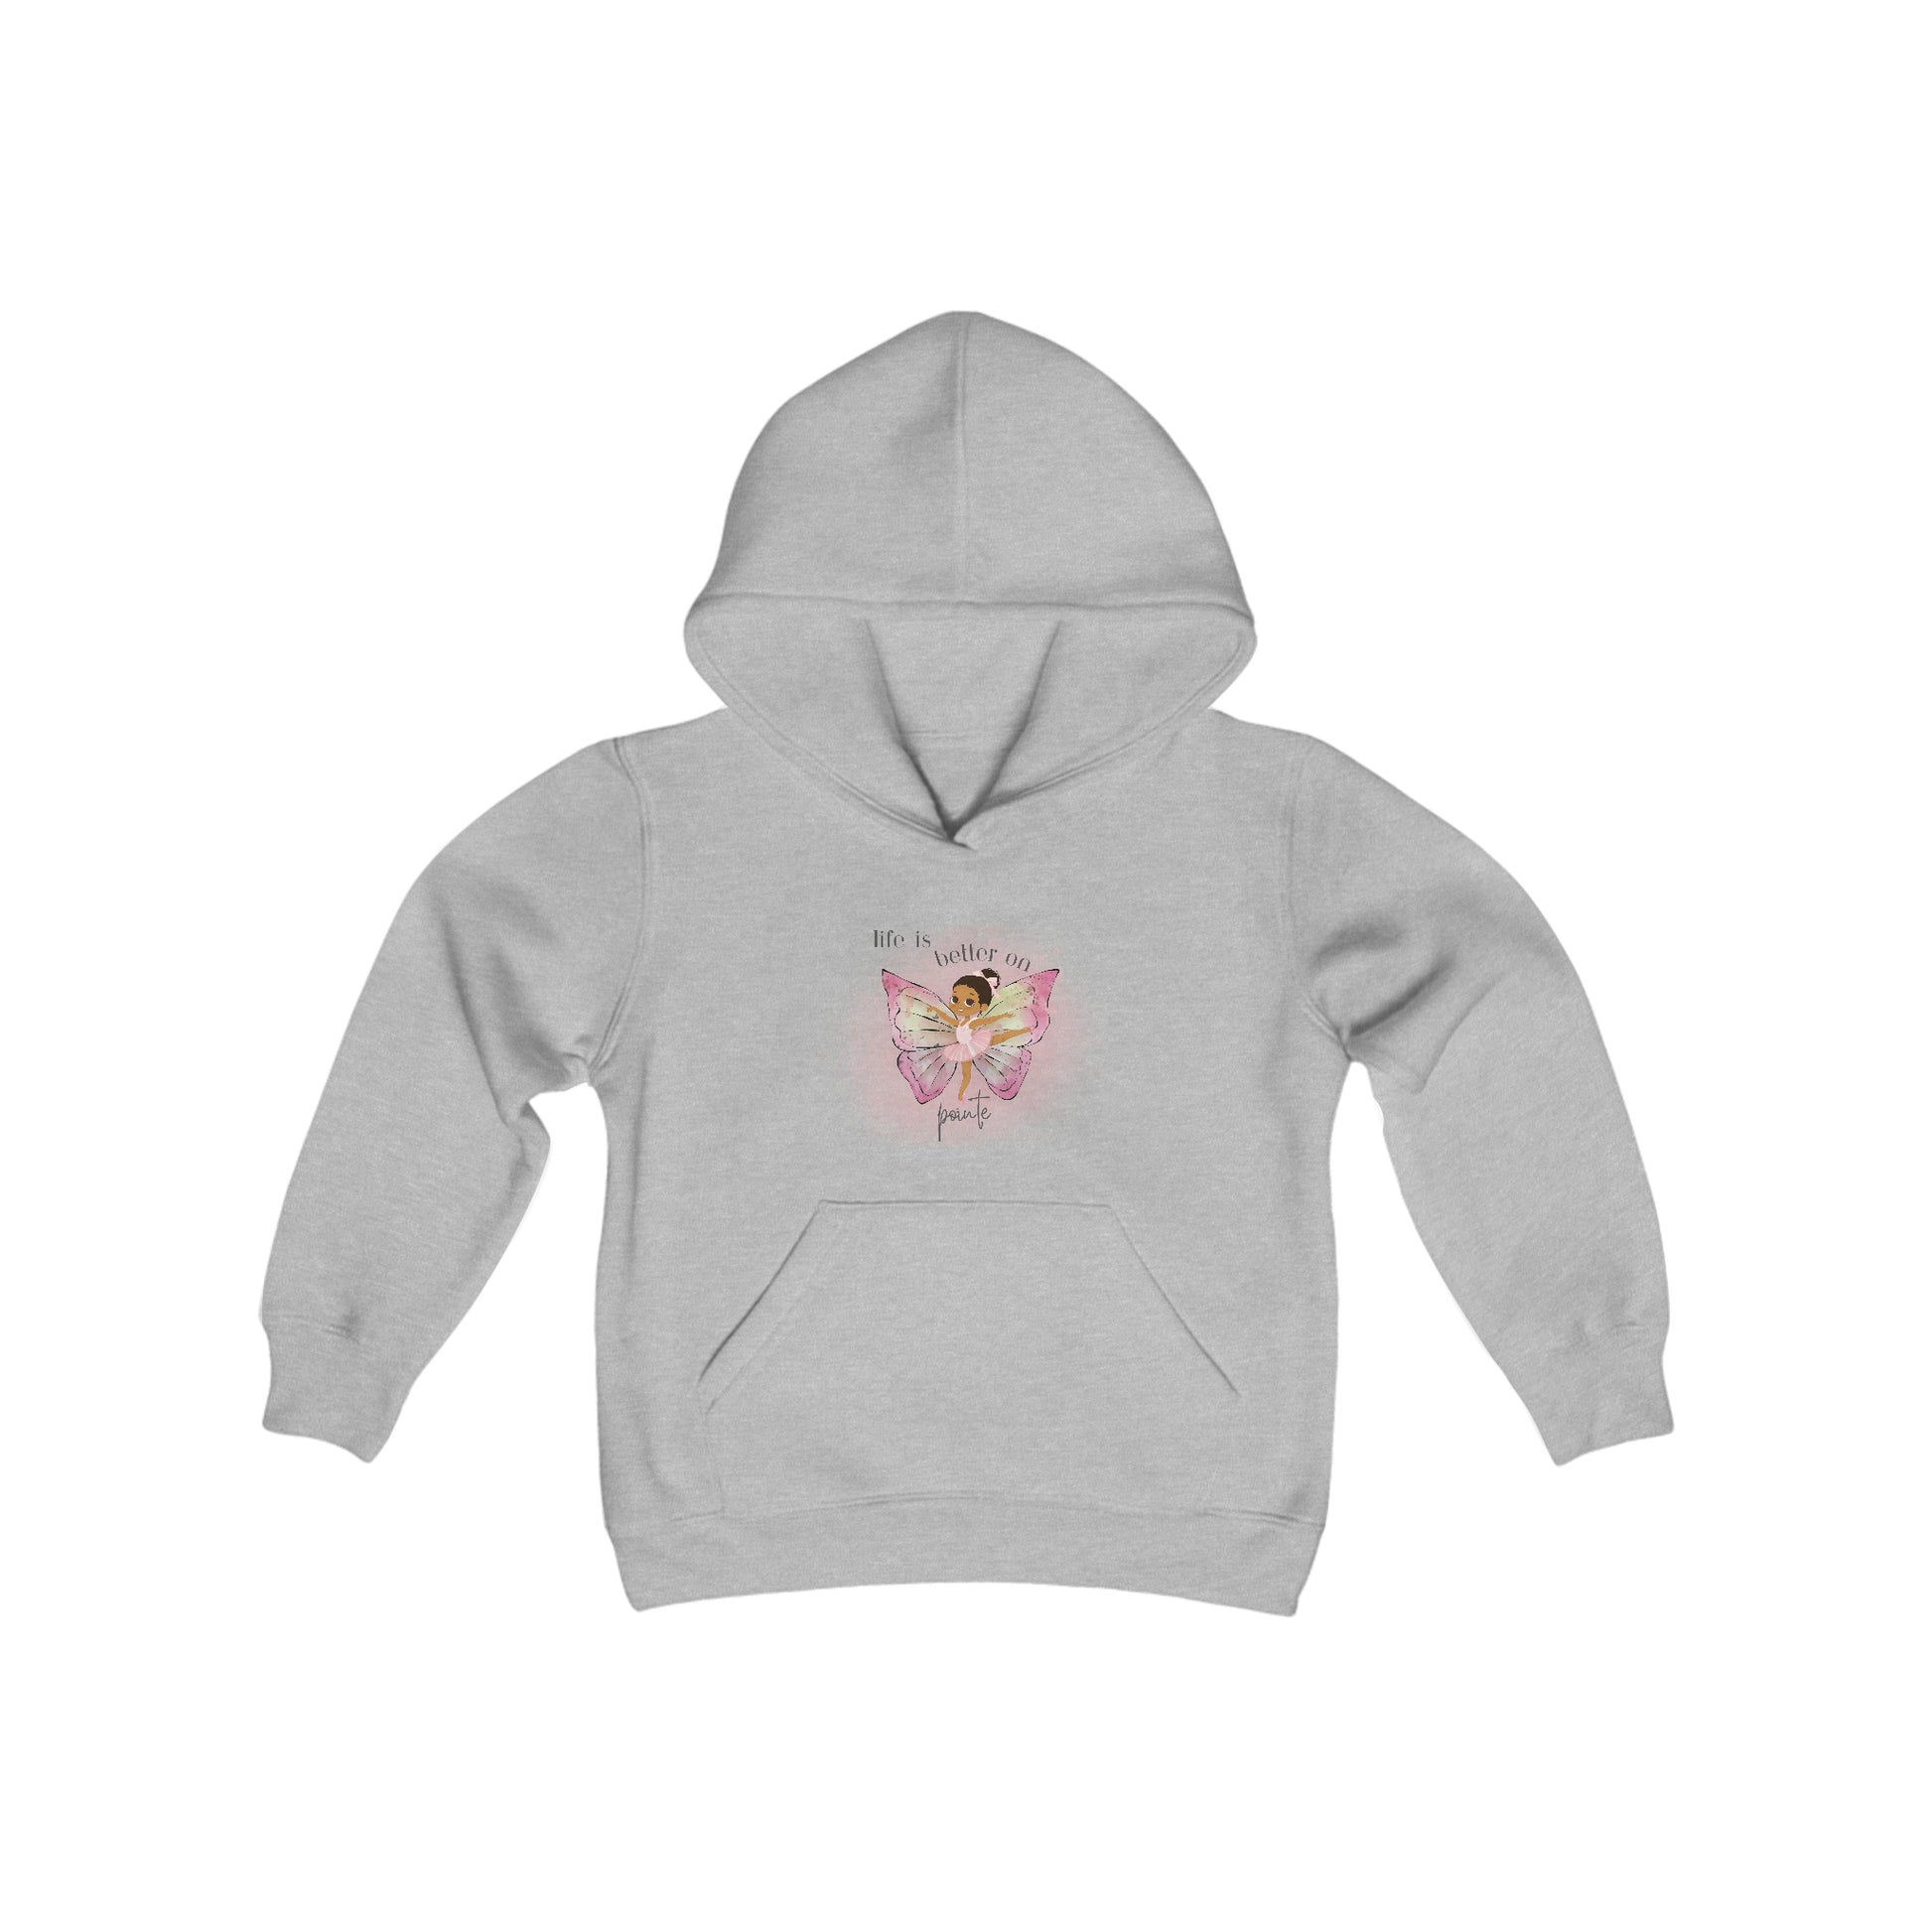 Youth Hooded Sweatshirt - African decent Ballerina with butterfly wings - grey